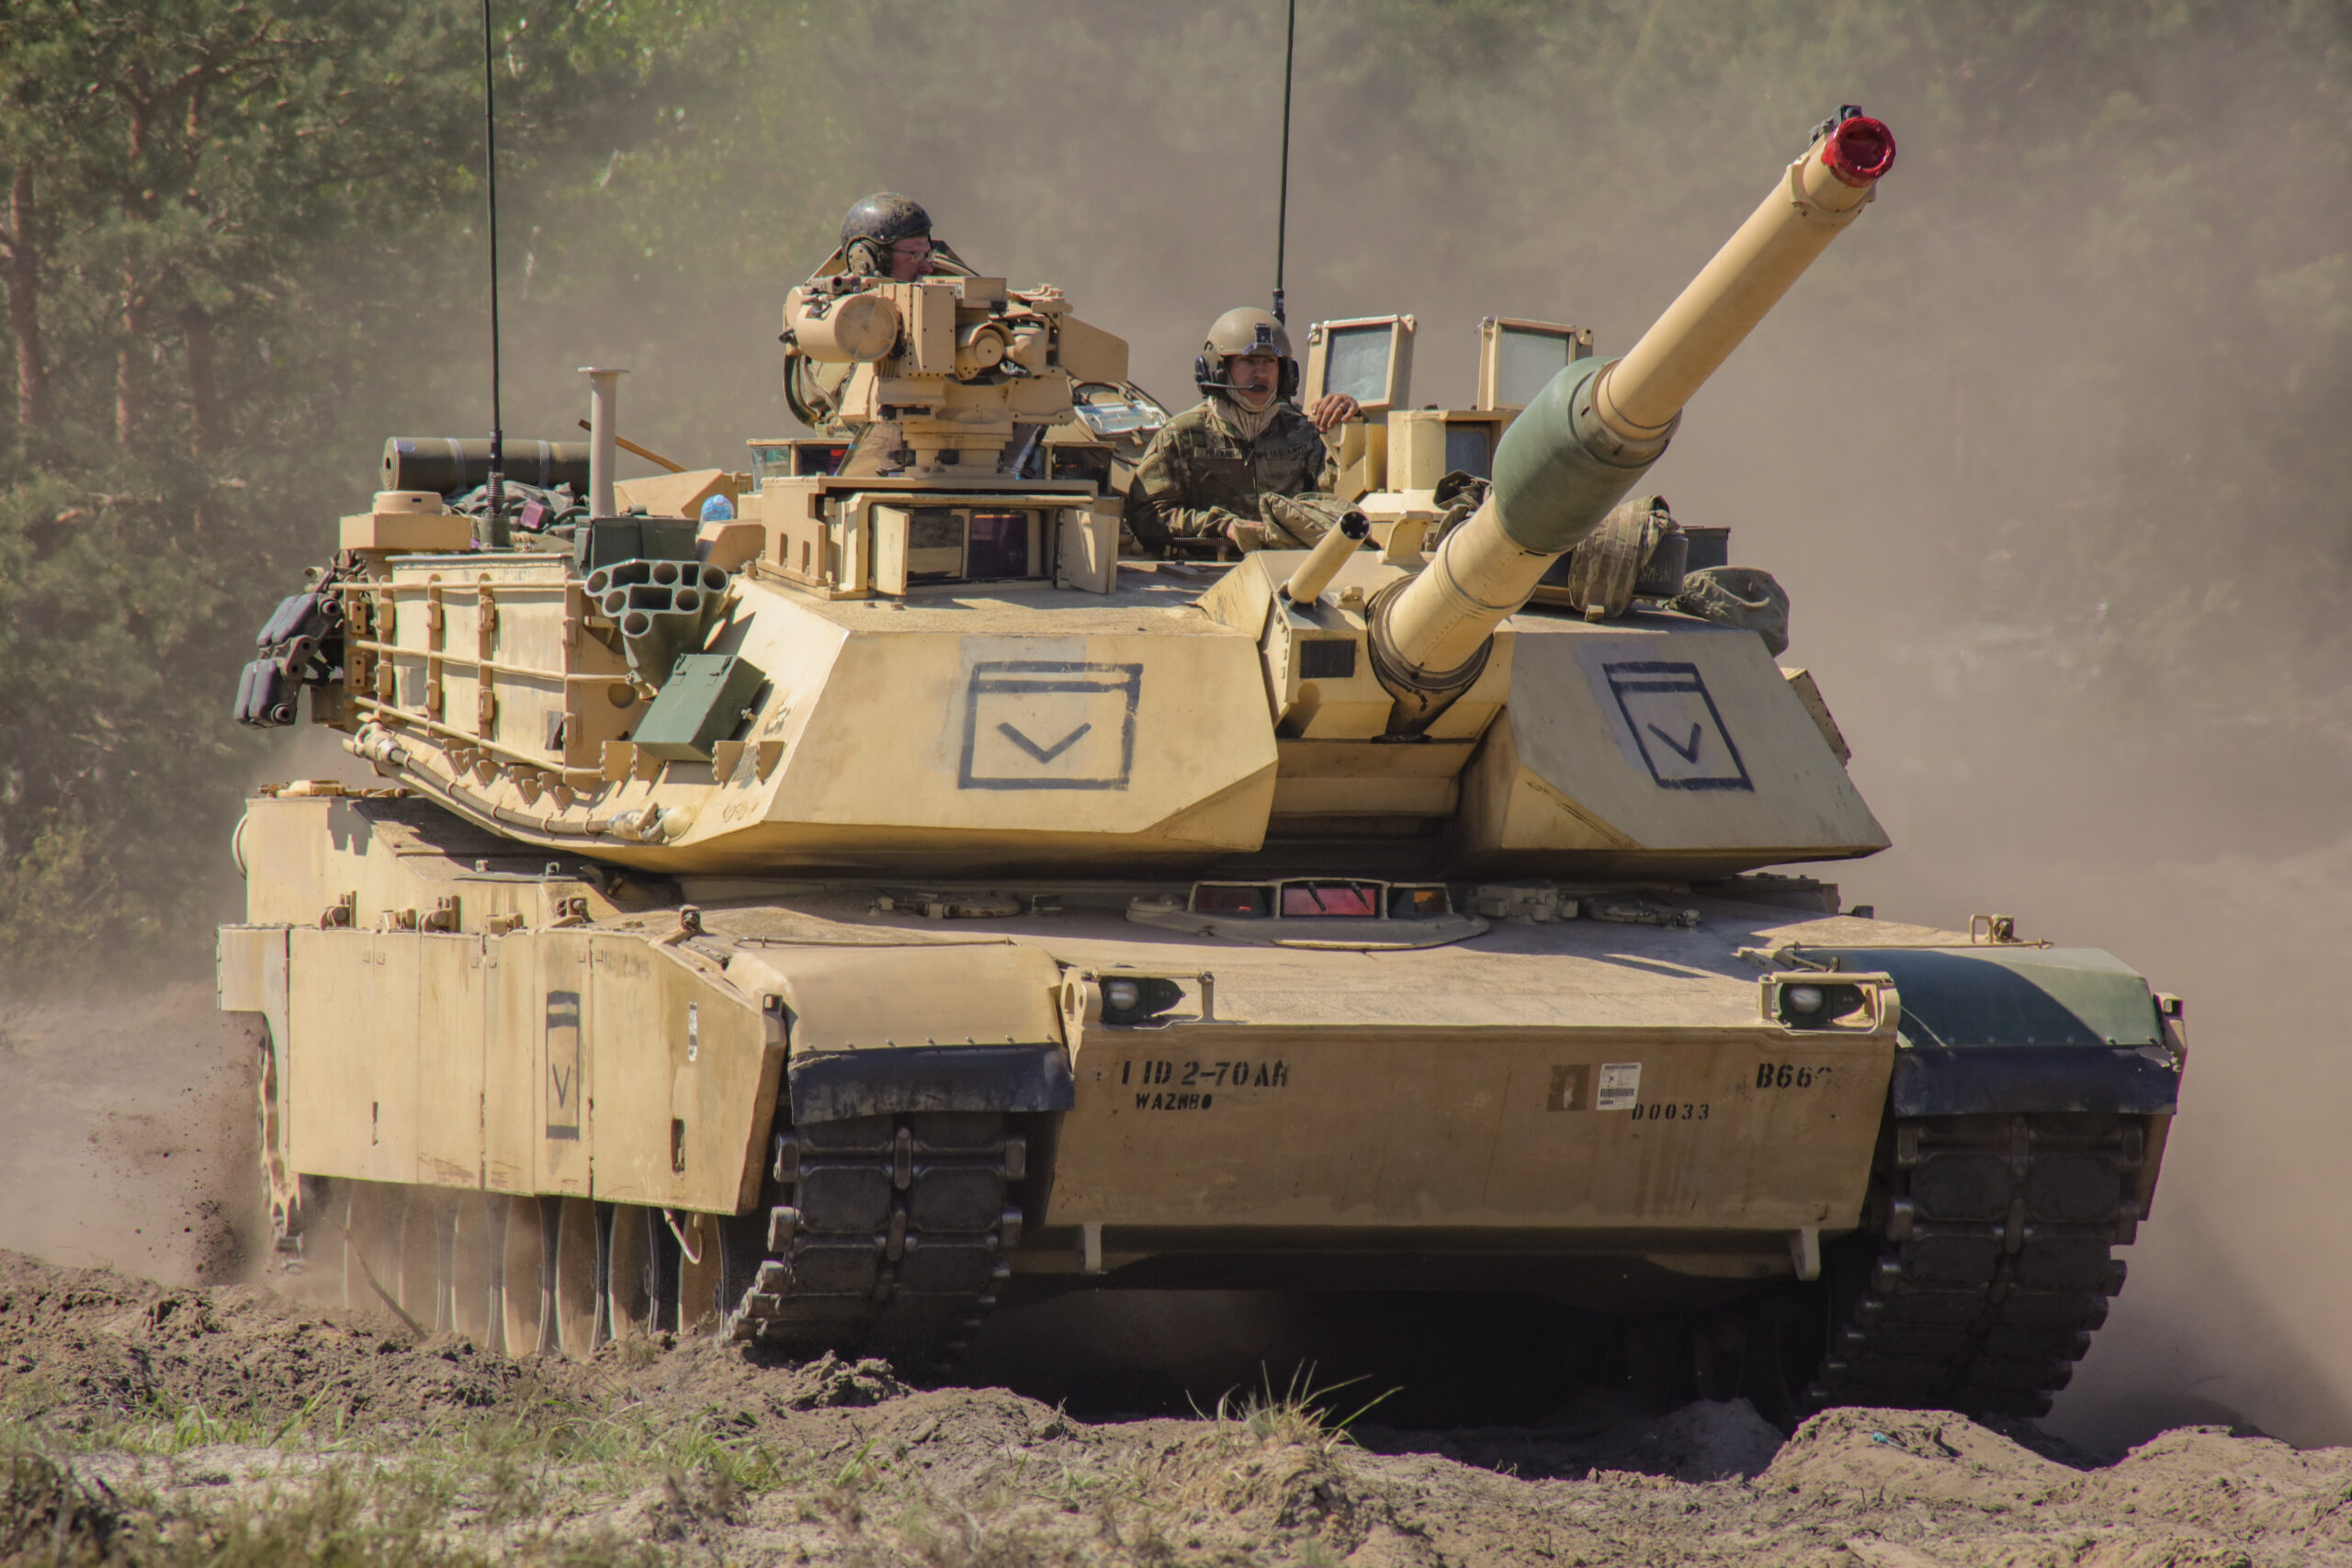 M1 Abrams Tank and Some of Its Crew, adapted from defense.gov image with photo credit to Army Sgt. 1st Class Theresa Gualdarama, National Guard